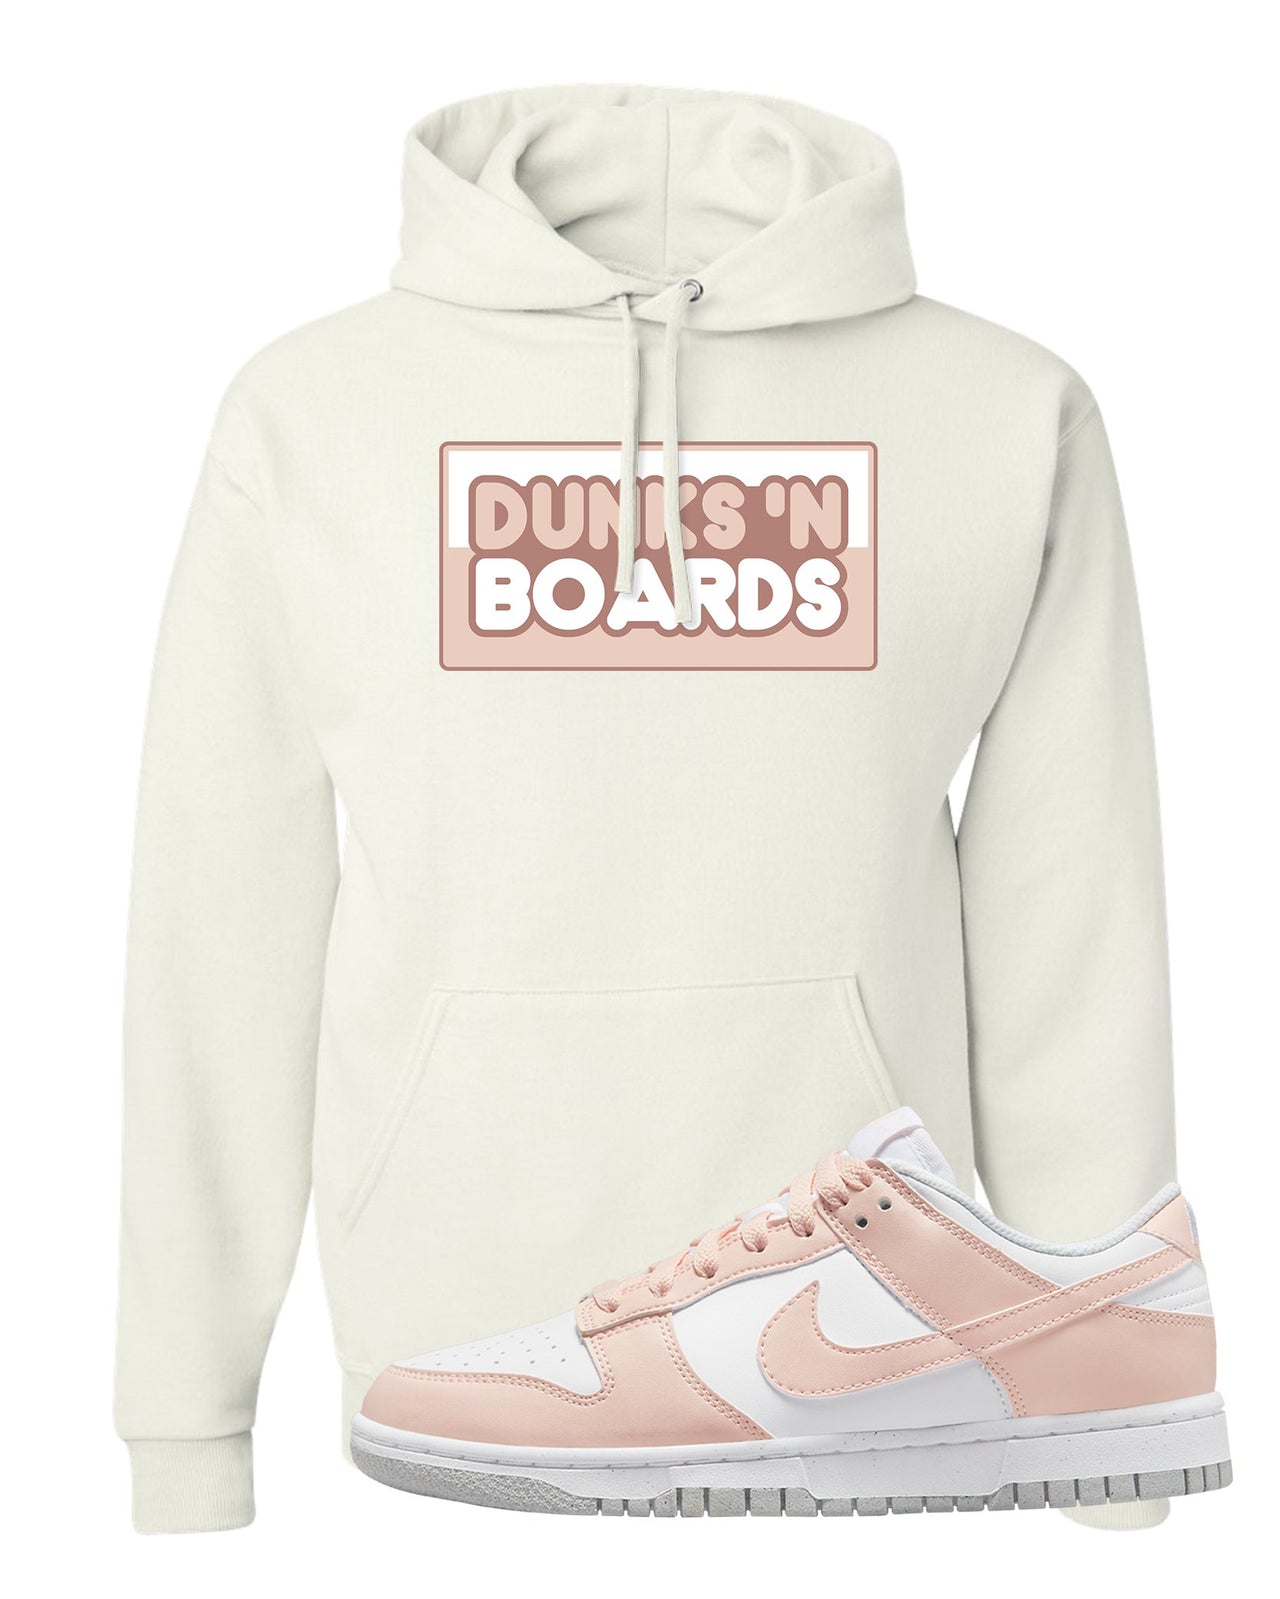 Next Nature Pale Citrus Low Dunks Hoodie | Dunks N Boards, White